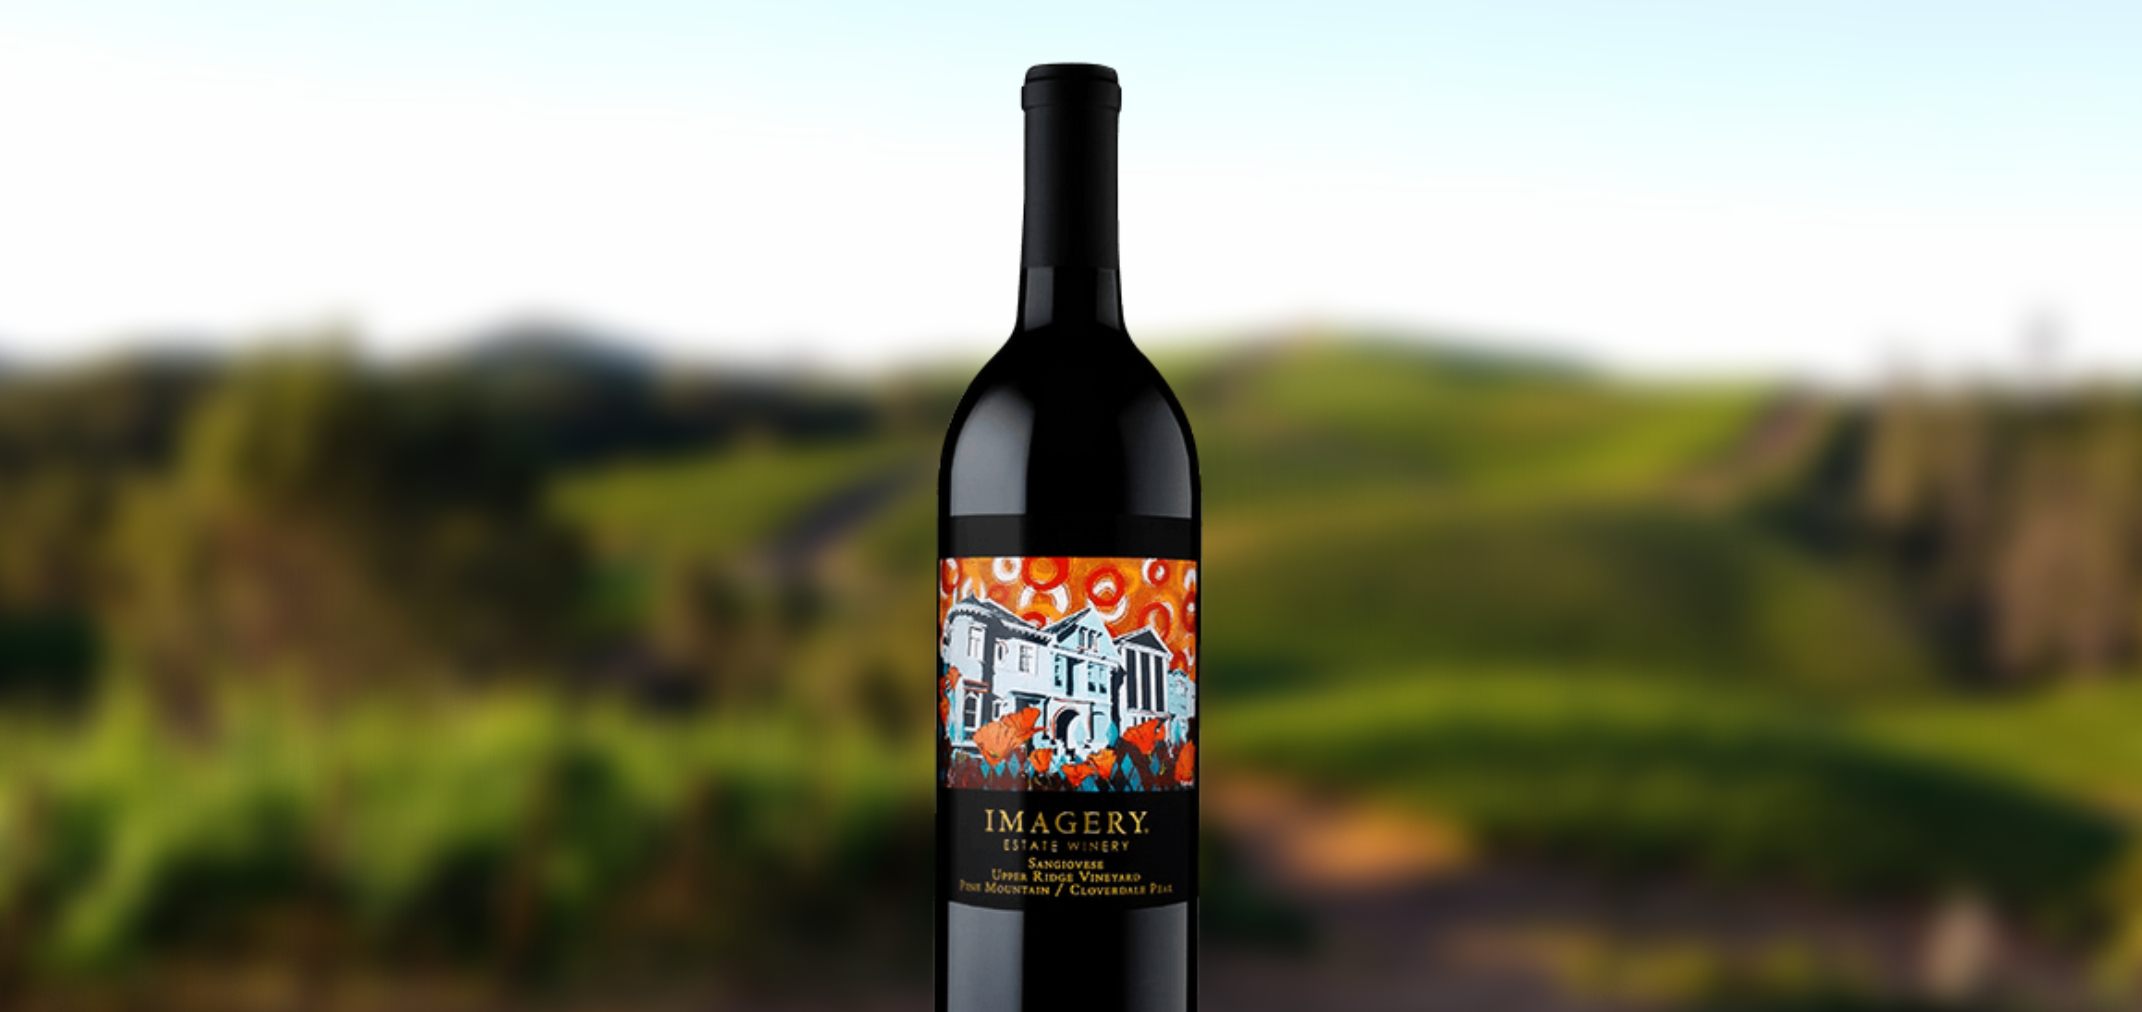 Imagery's Sangiovese